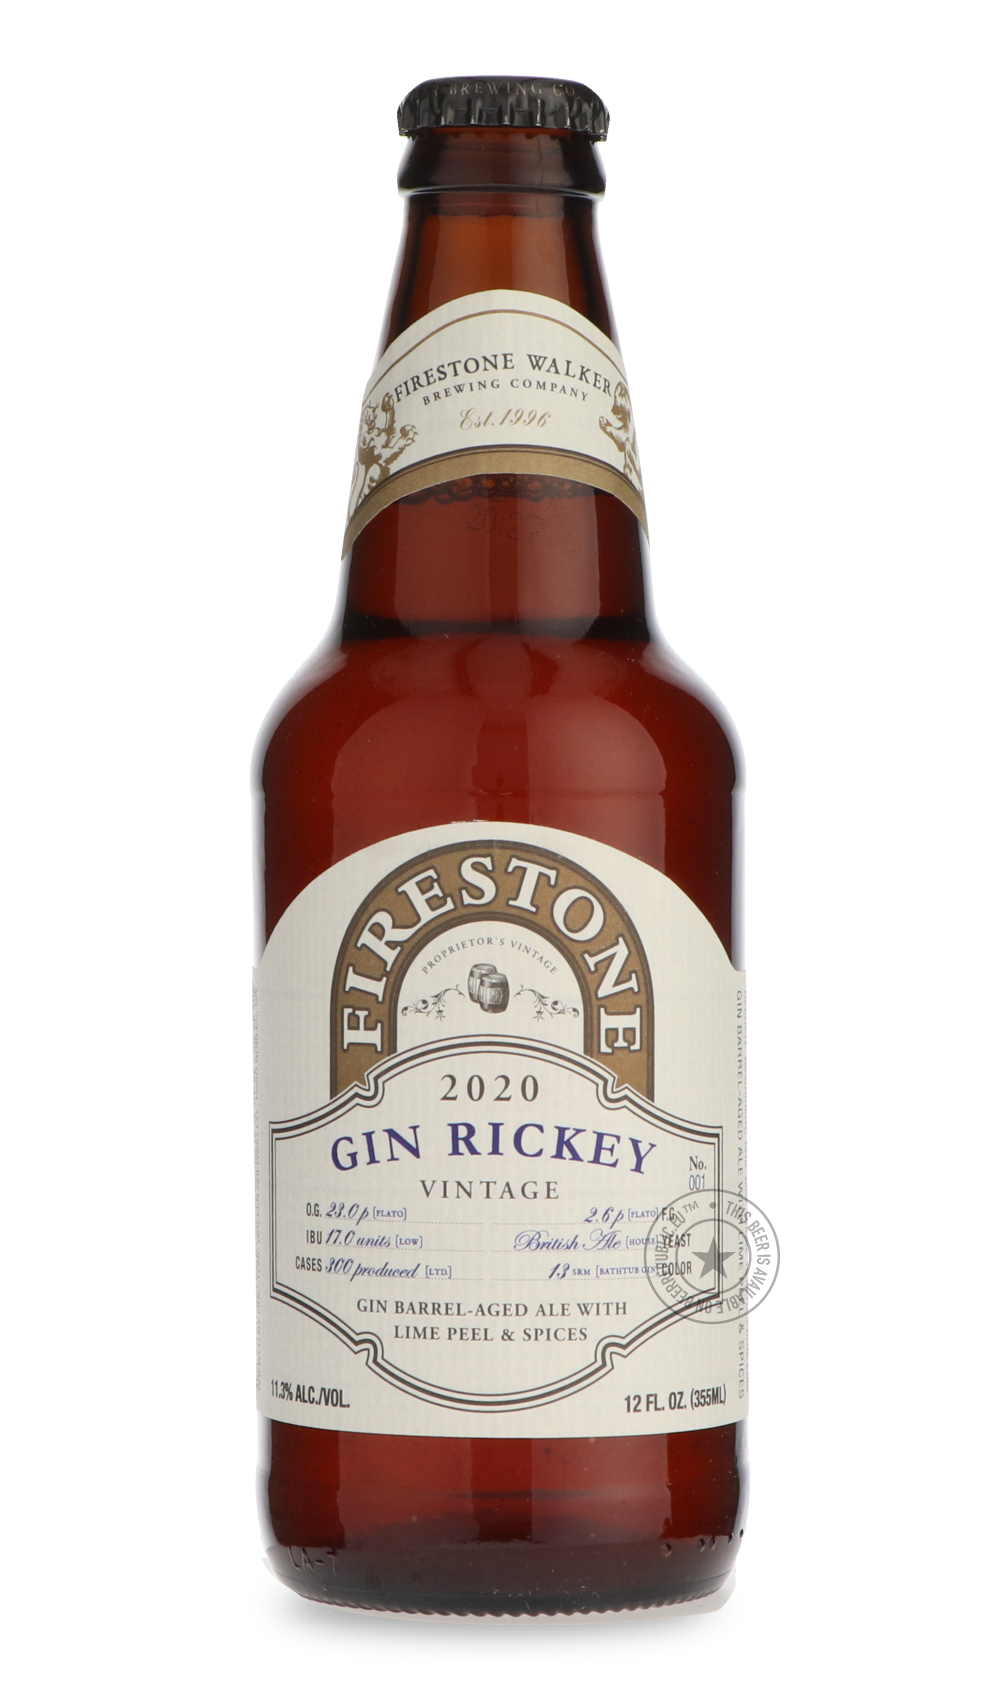 -Firestone Walker- Gin Rickey-Pale- Only @ Beer Republic - The best online beer store for American & Canadian craft beer - Buy beer online from the USA and Canada - Bier online kopen - Amerikaans bier kopen - Craft beer store - Craft beer kopen - Amerikanisch bier kaufen - Bier online kaufen - Acheter biere online - IPA - Stout - Porter - New England IPA - Hazy IPA - Imperial Stout - Barrel Aged - Barrel Aged Imperial Stout - Brown - Dark beer - Blond - Blonde - Pilsner - Lager - Wheat - Weizen - Amber - Ba